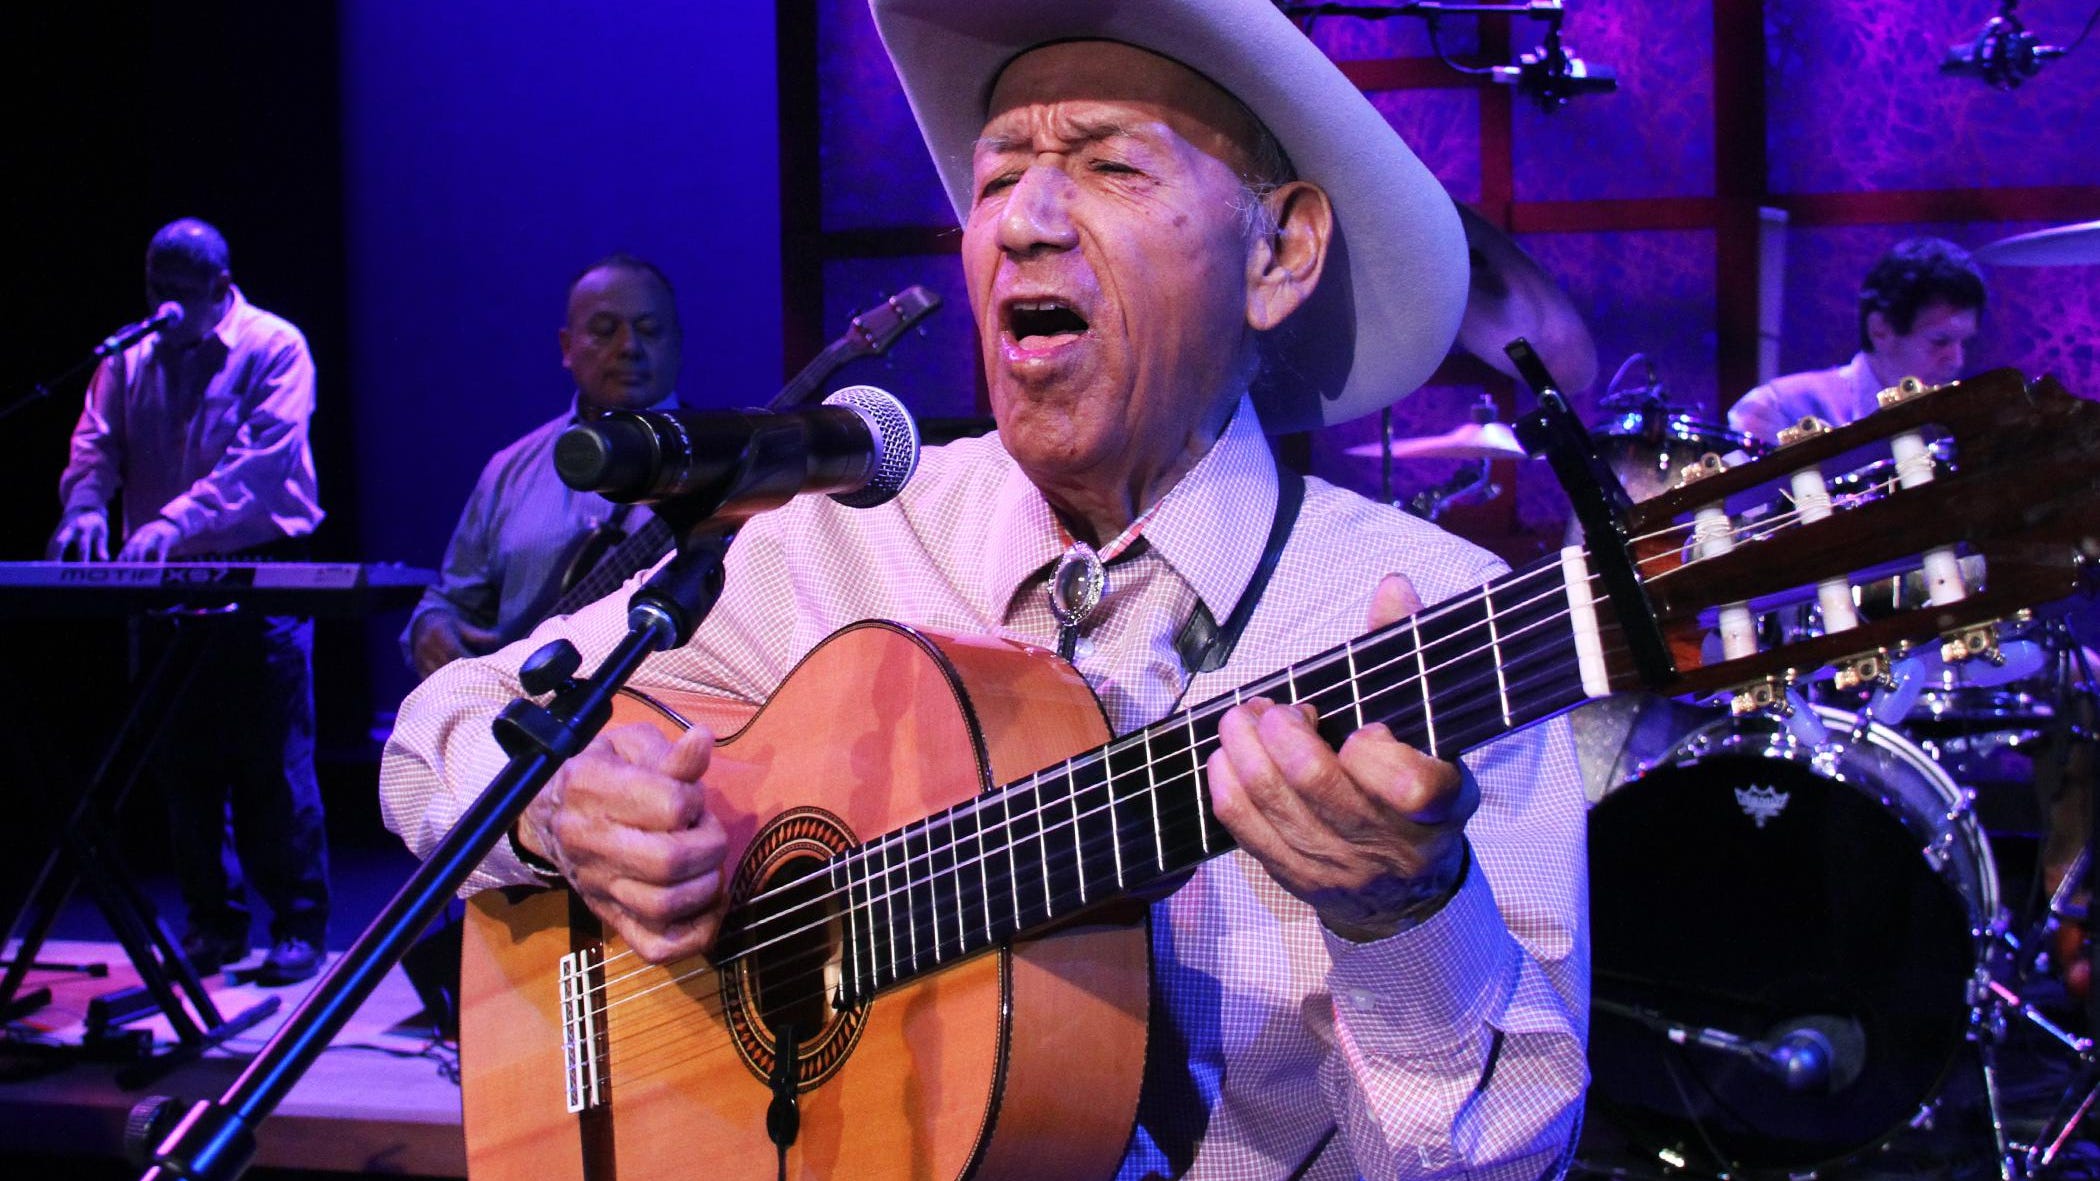 Manuel "Cowboy" Donley performs at the 2014 National Endowment for the Arts' National Heritage Fellowships Concert. The "Godfather of Tejano music" died at 92 on Sunday.